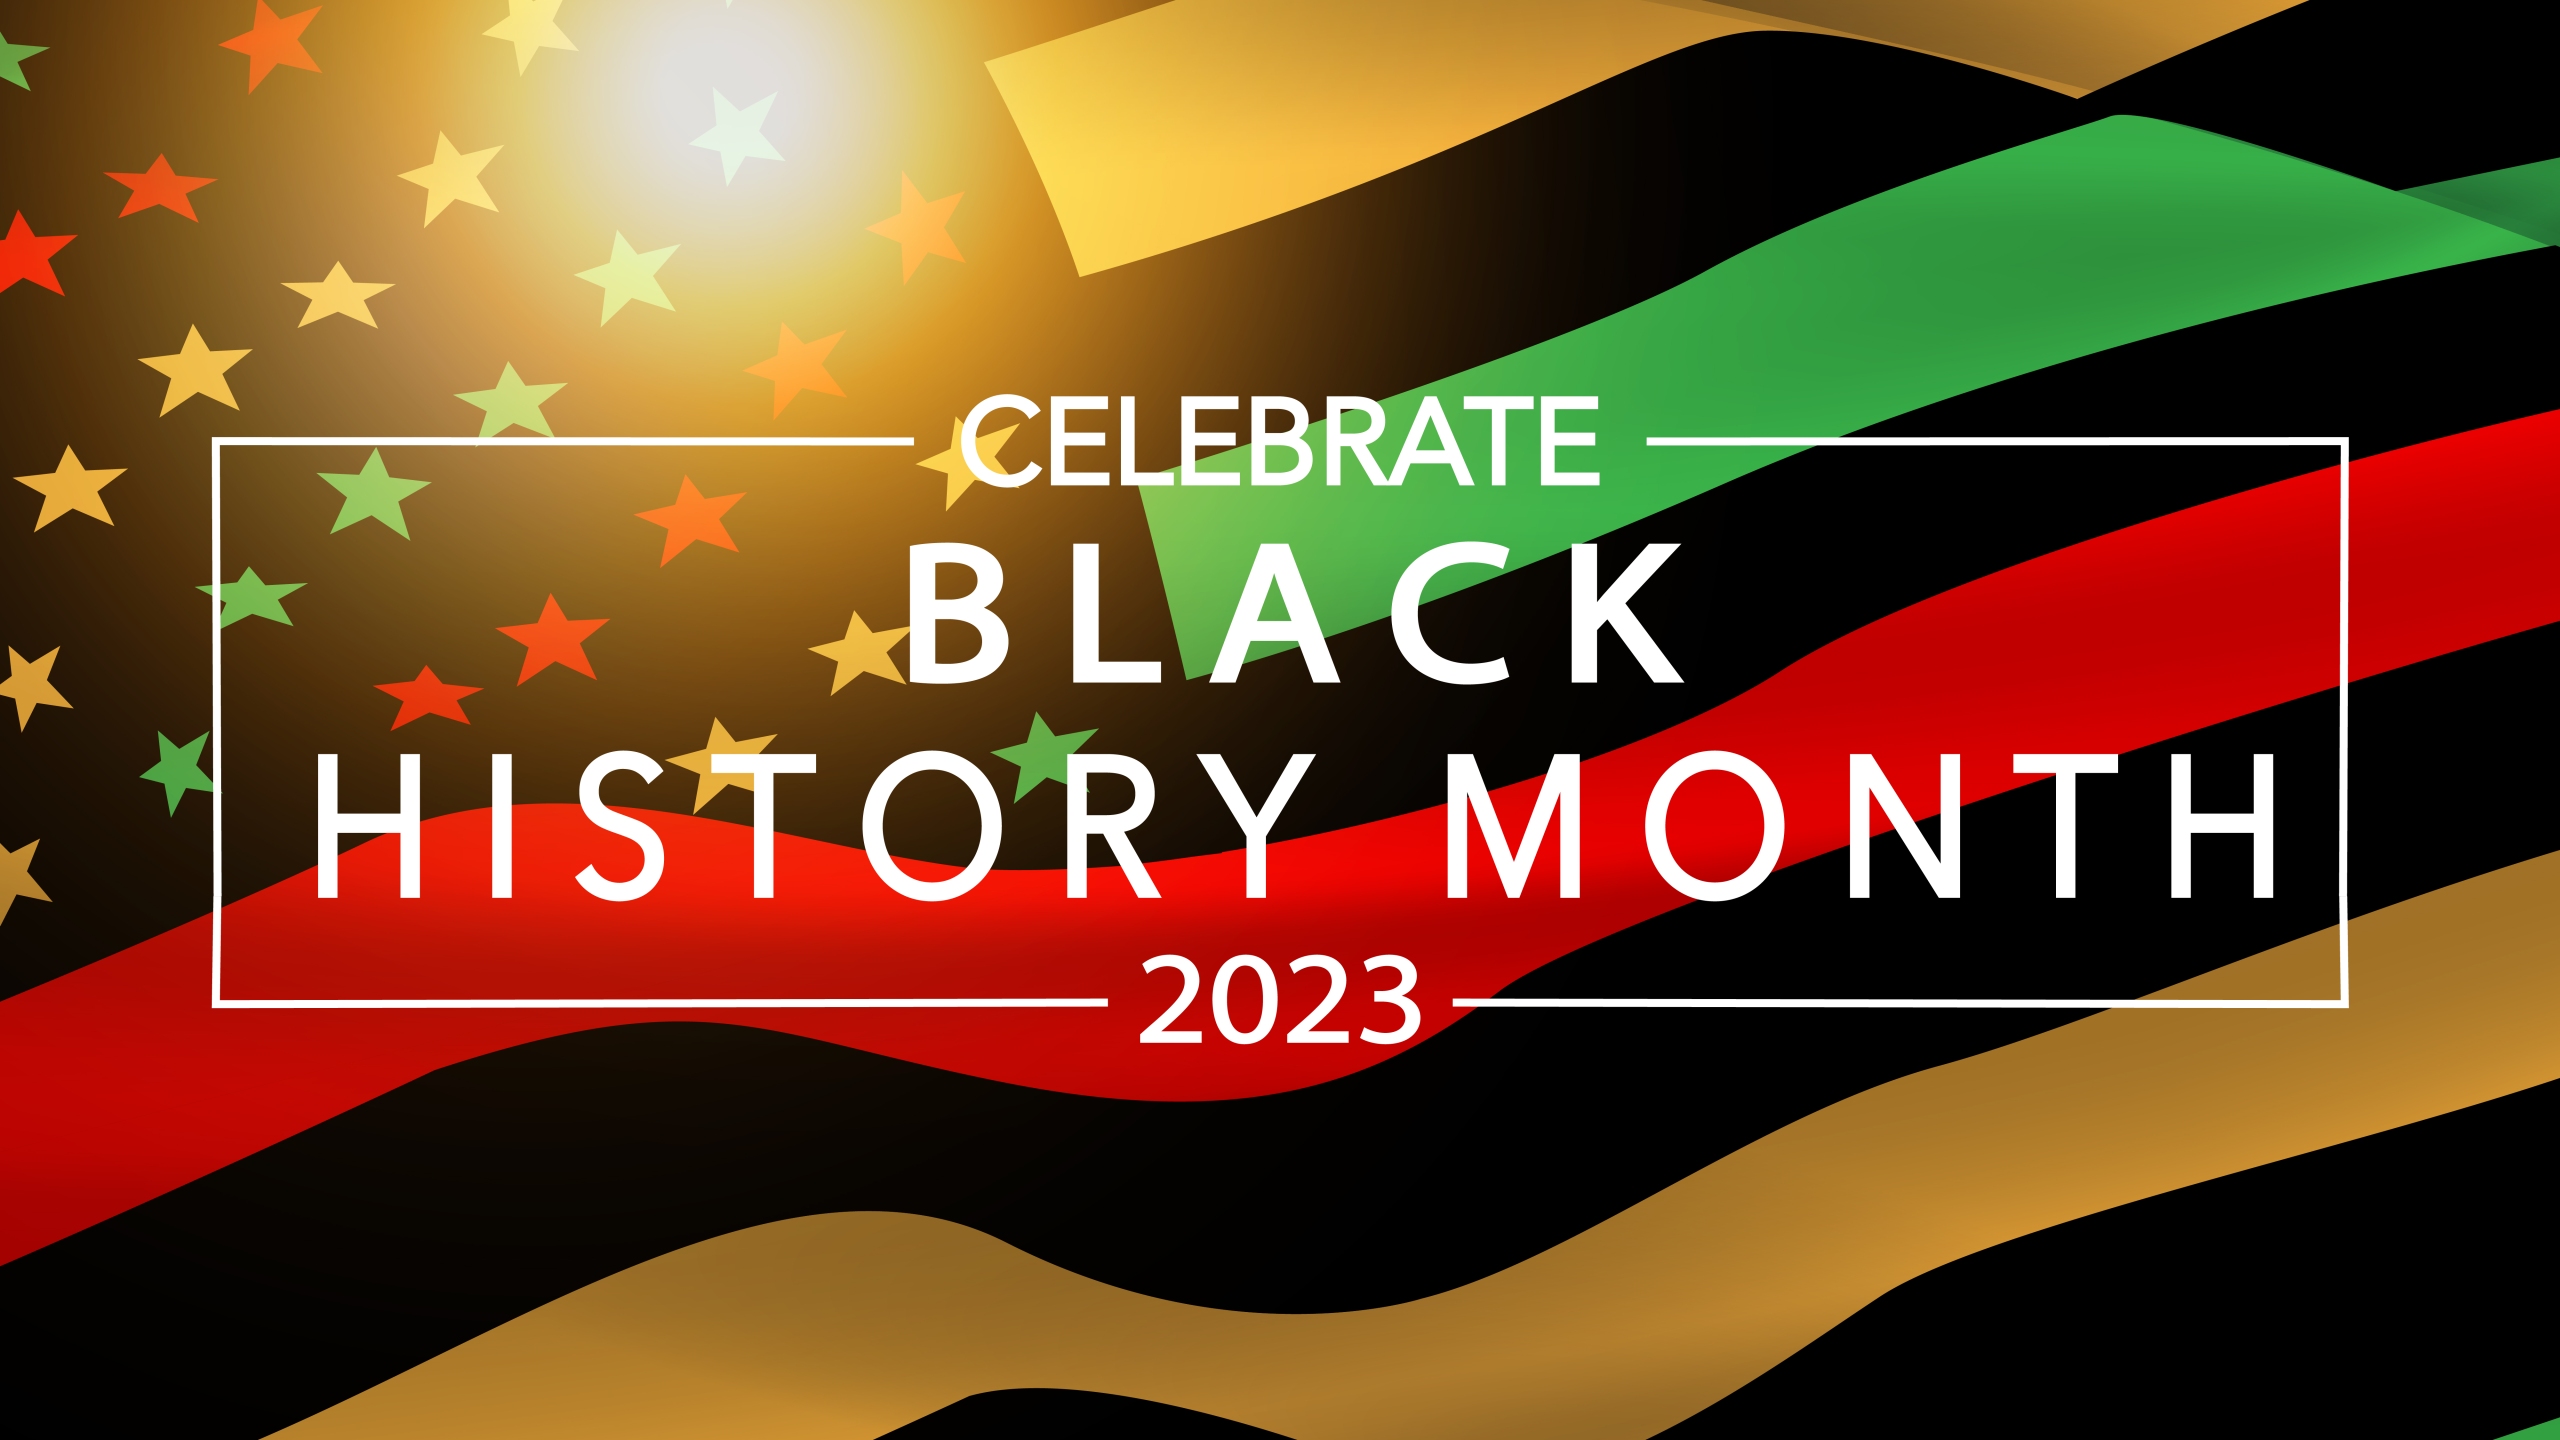 Celebrate Black History Month in West Michigan